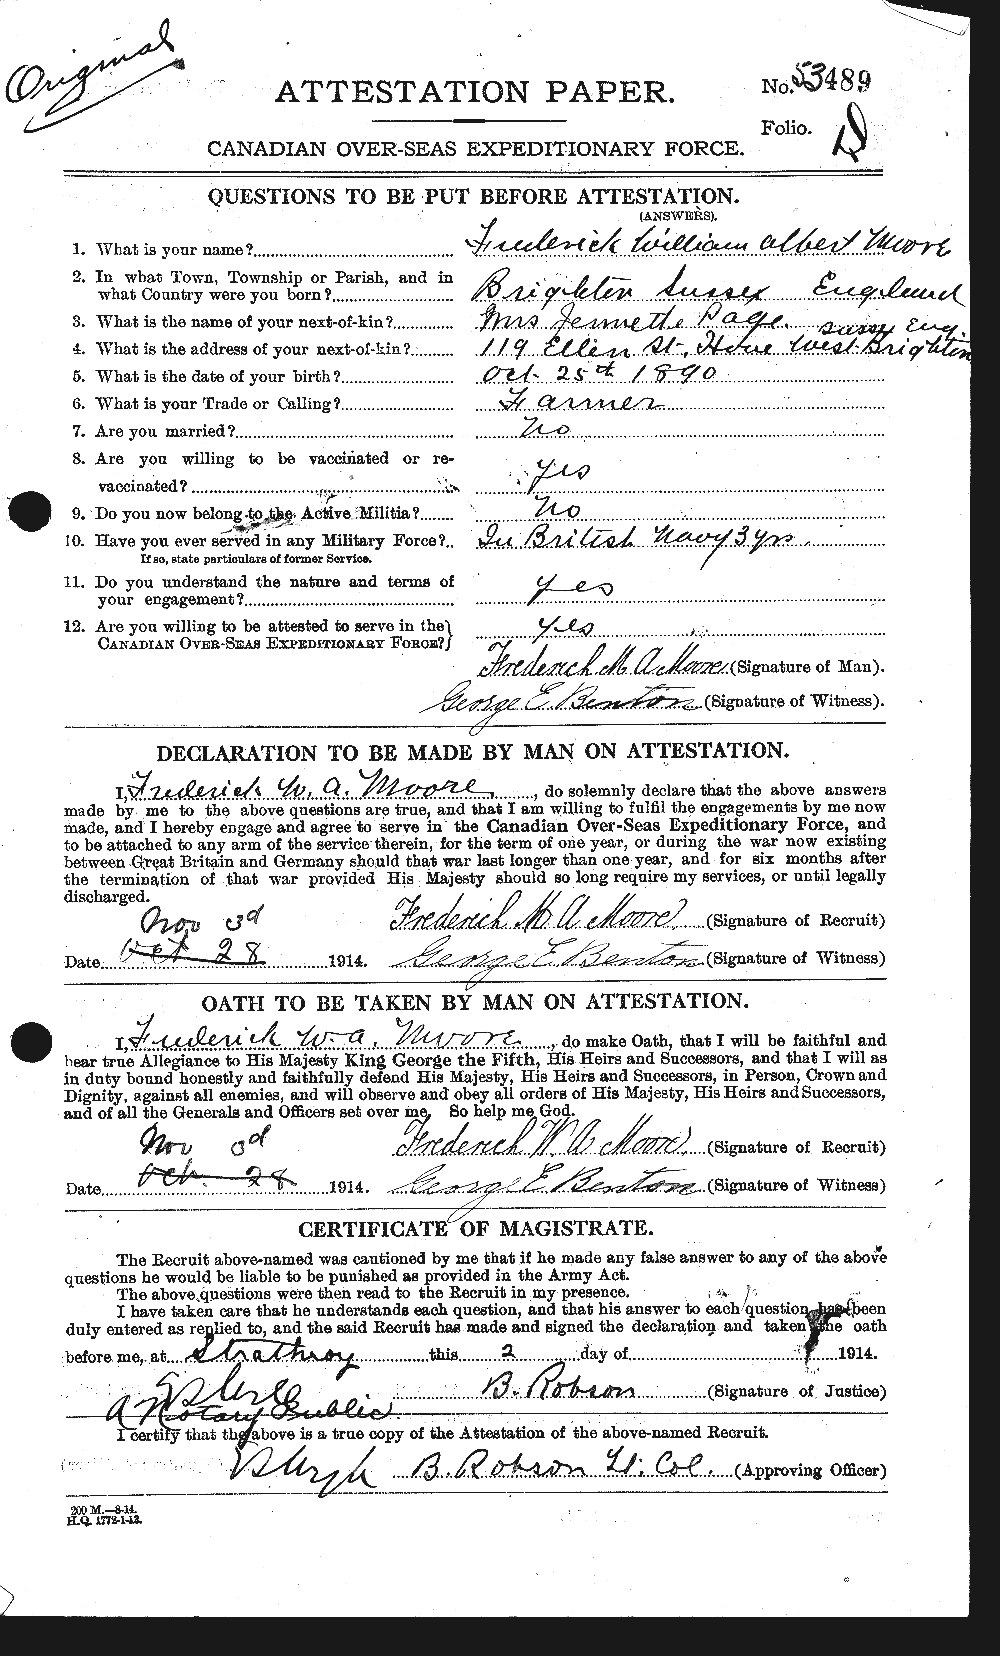 Personnel Records of the First World War - CEF 506759a